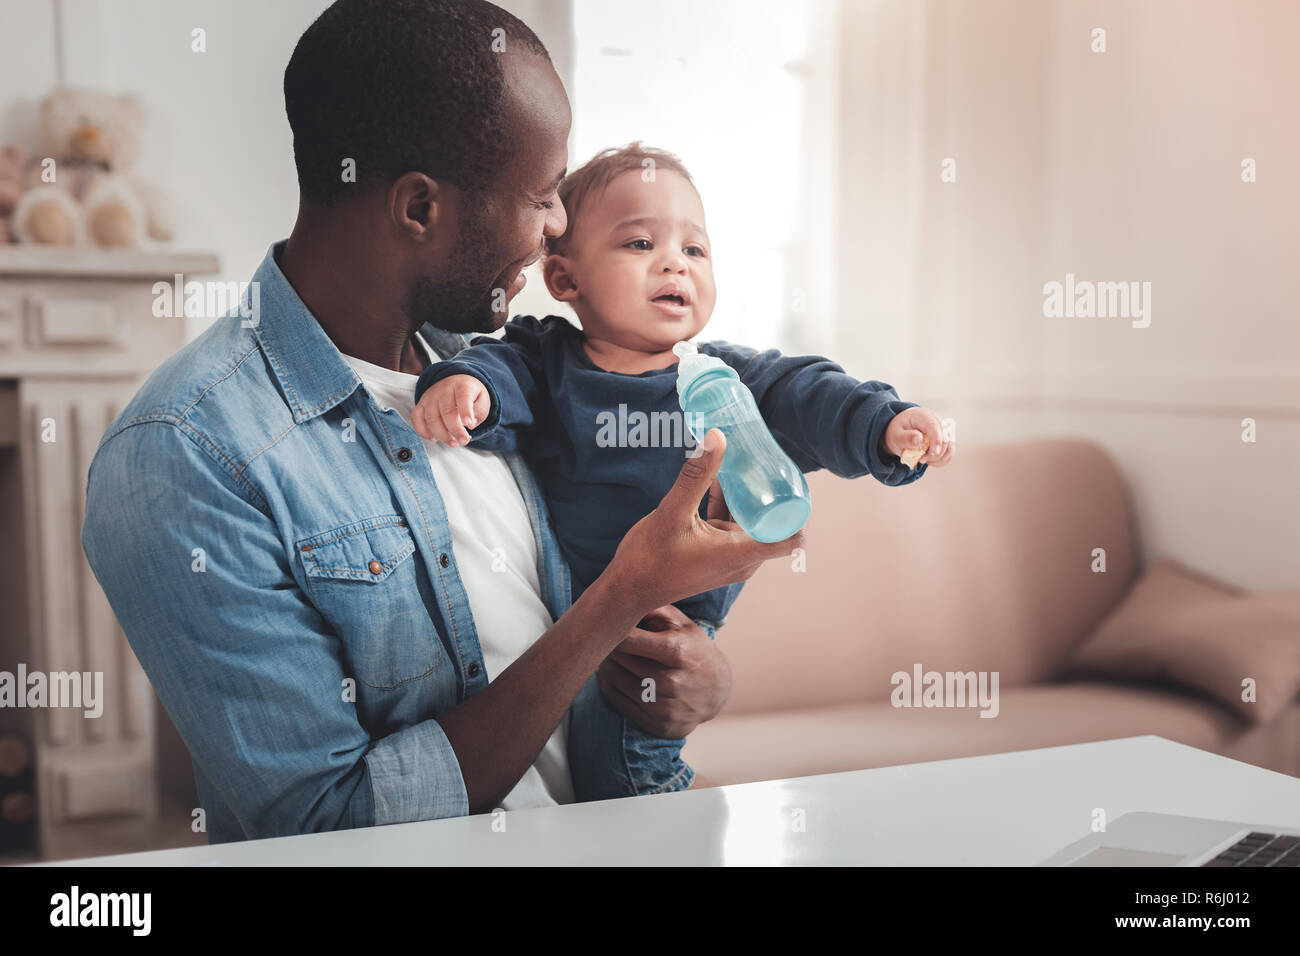 Cheerful pleasant man looking after his baby Stock Photo